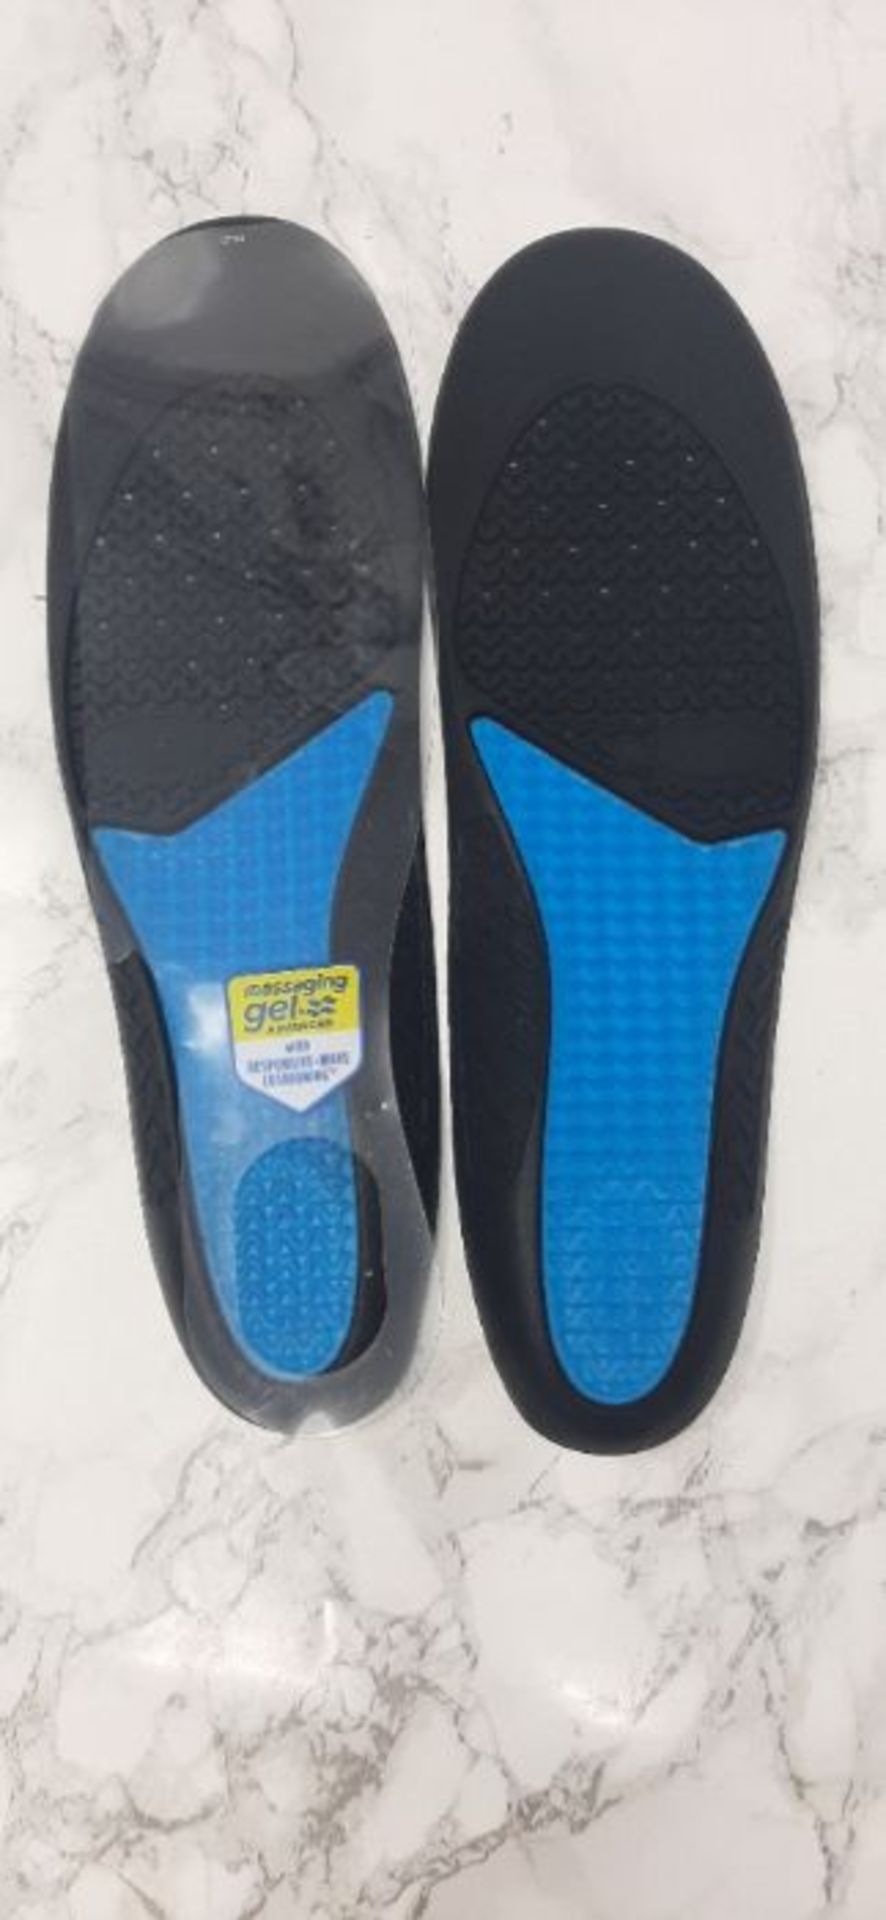 Dr. Scholl's 11017570110 Comfort and Energy Work Insoles for Men, 1 Pair, Size 8-14 - Image 2 of 3